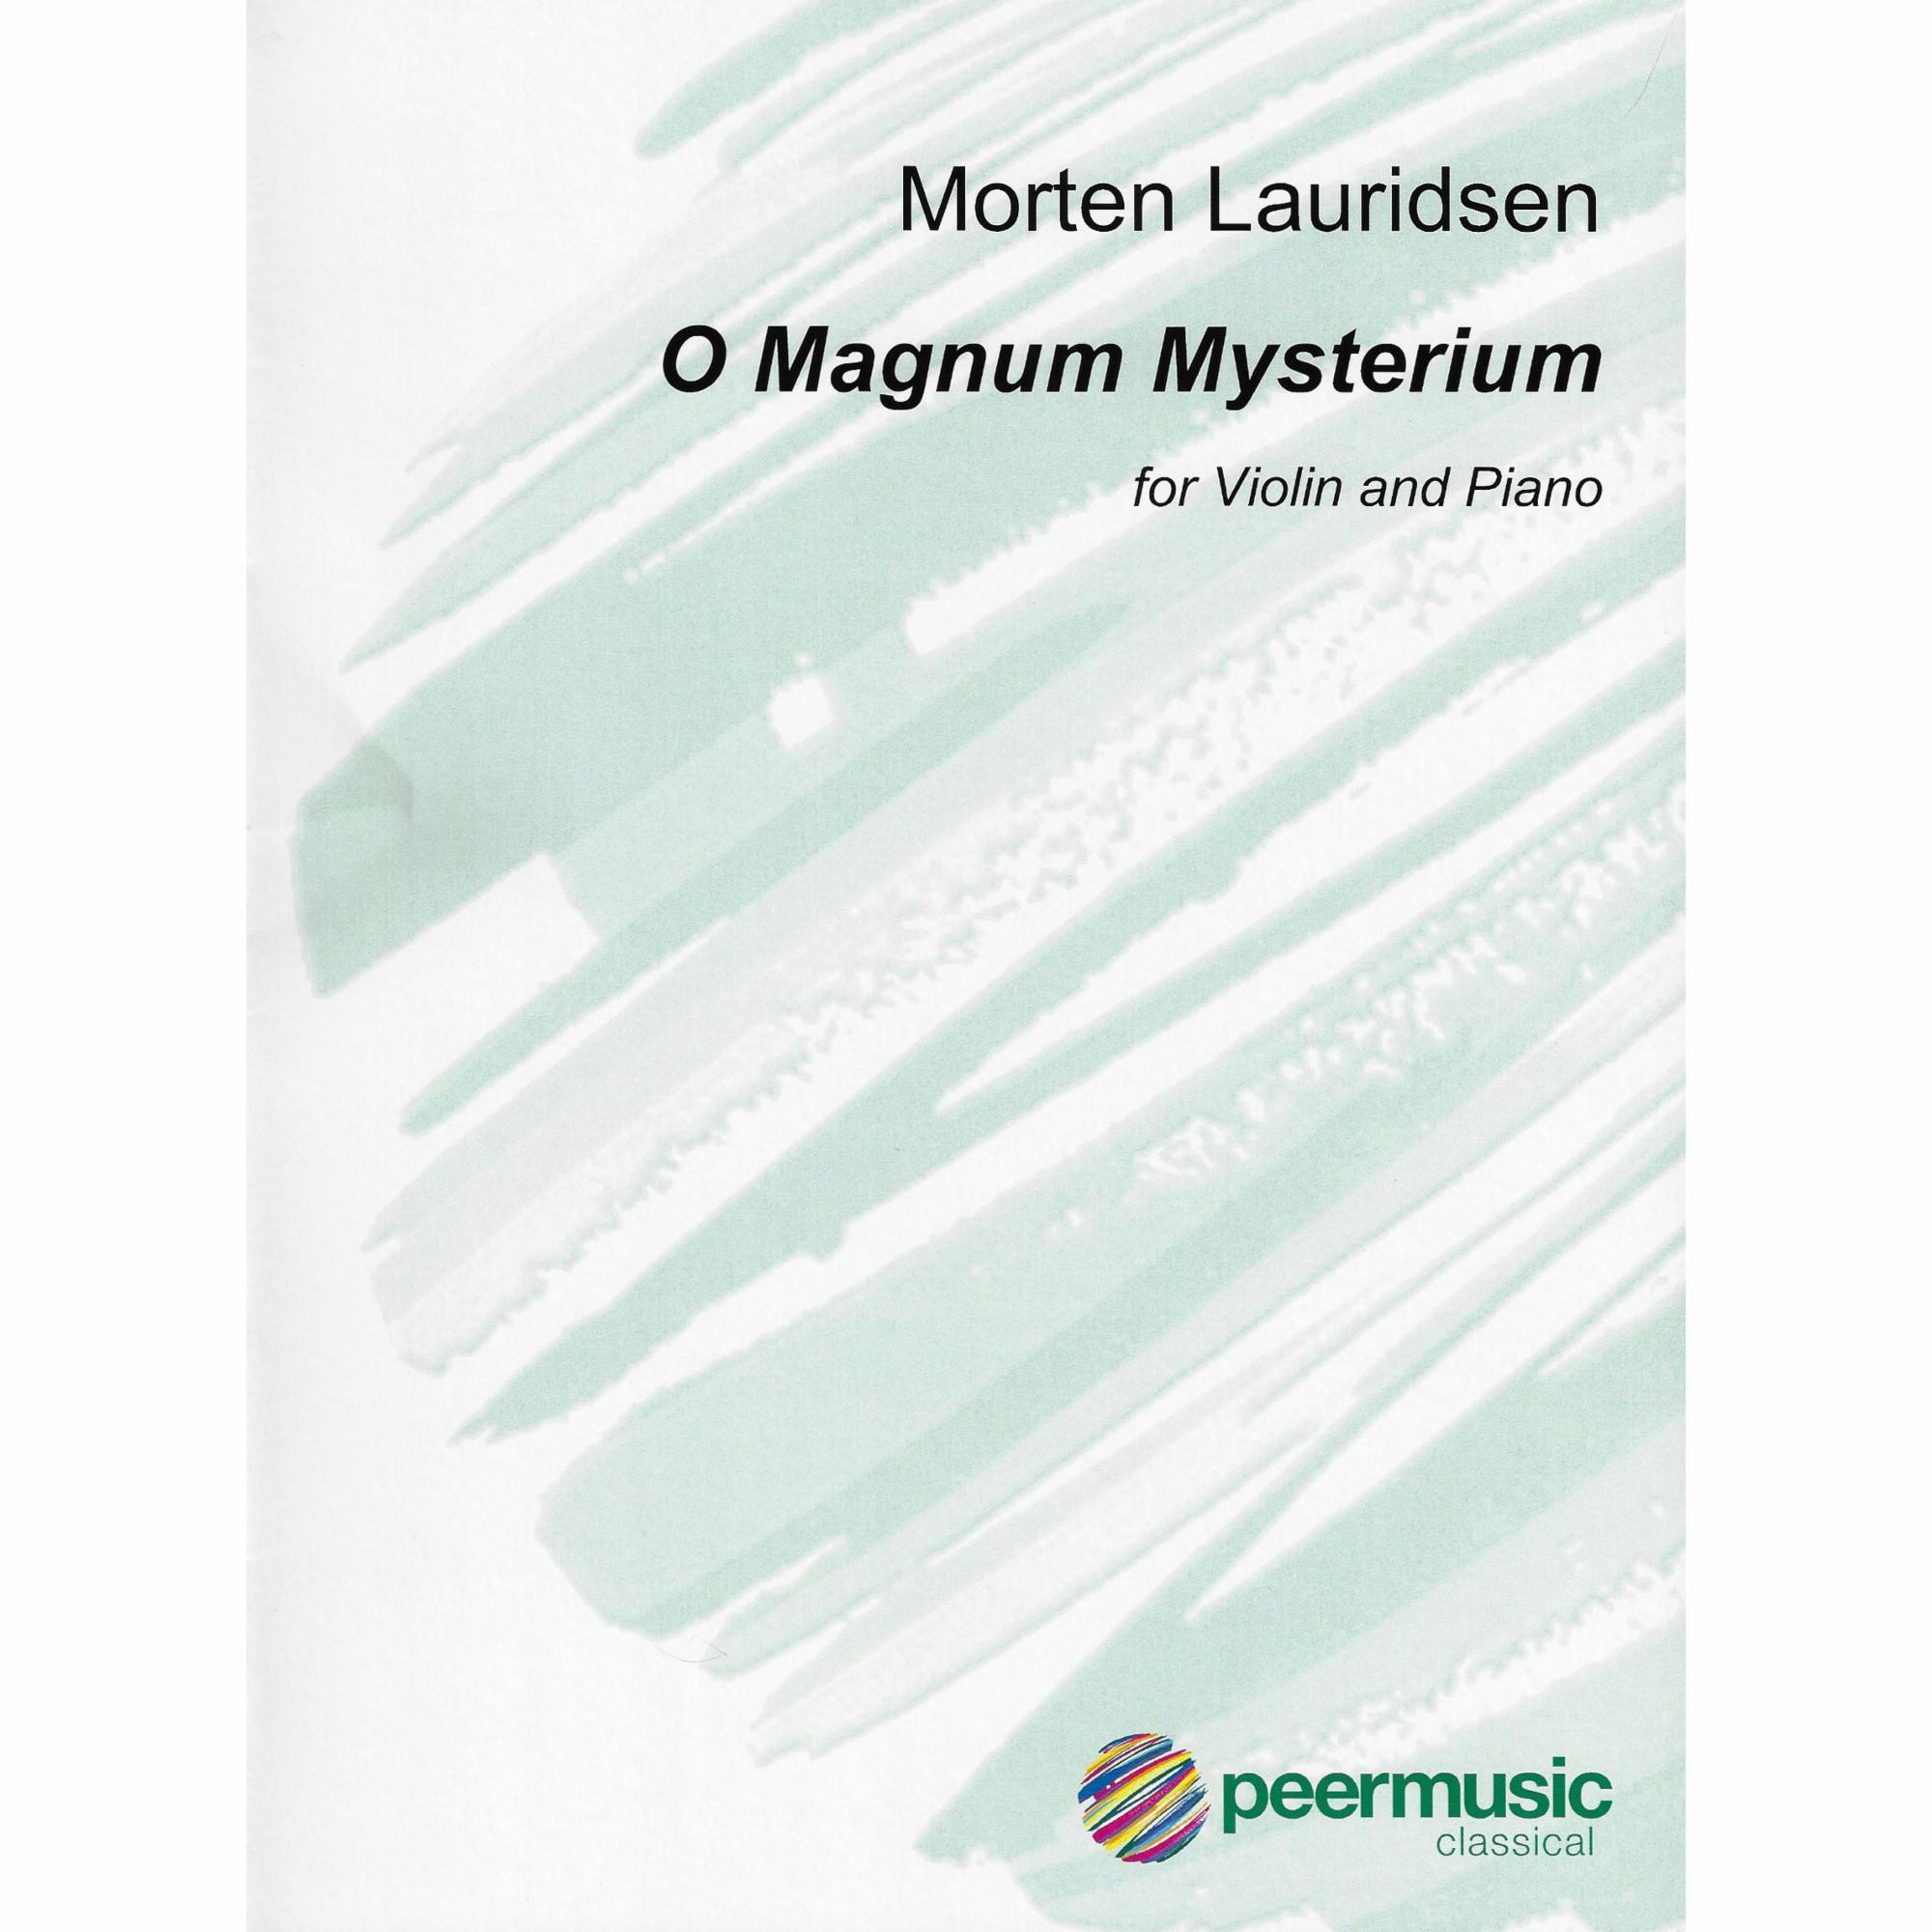 Lauridsen -- O Magnum Mysterium for Violin and Piano